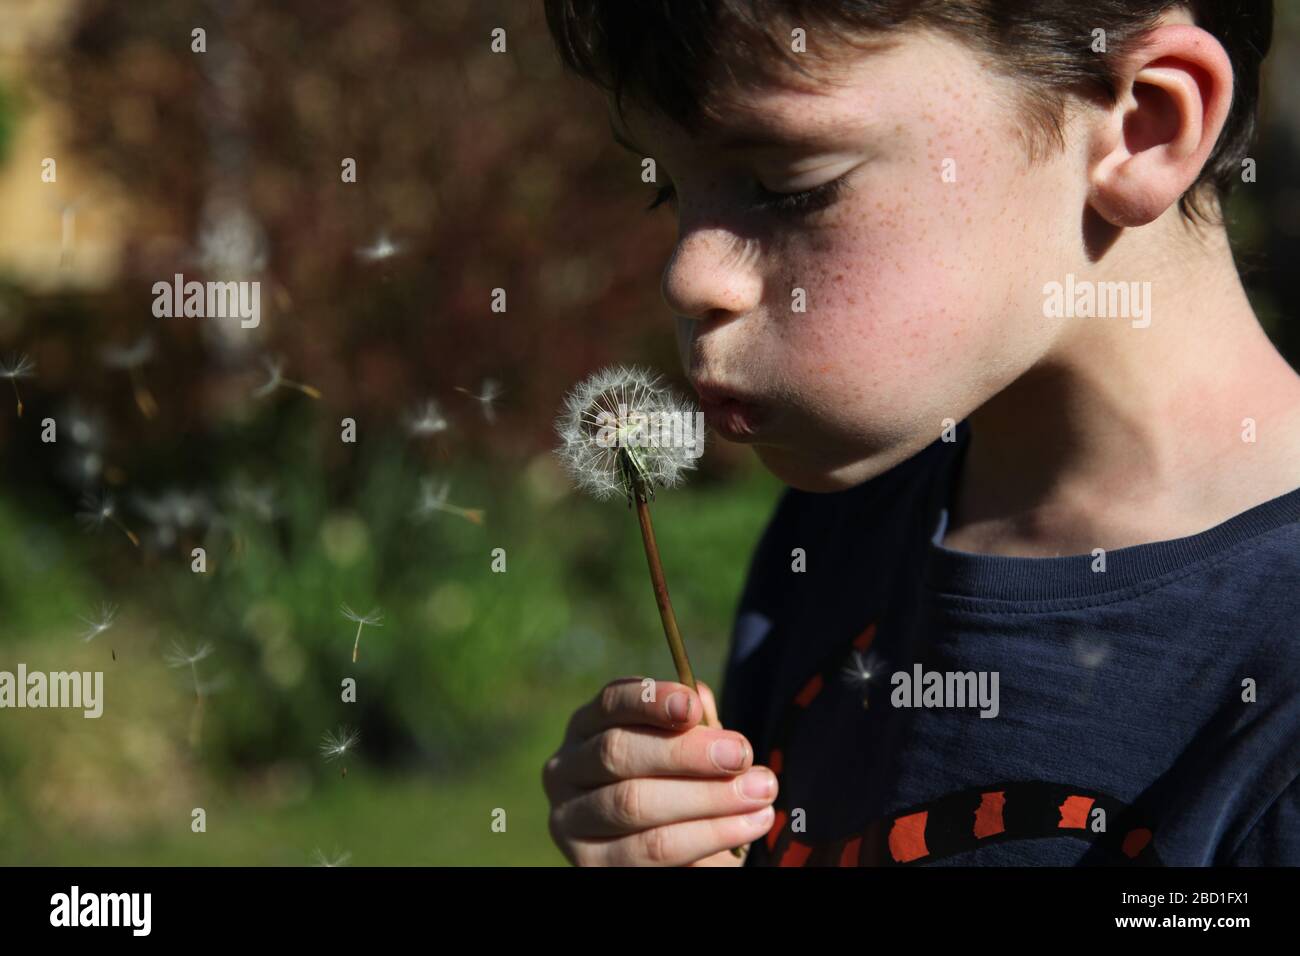 A young boy, aged 9, blowing on a dandelion 'Taraxacum' parachute ball head in a UK garden at daytime, pappus floating in wind, Spring 2020 Stock Photo